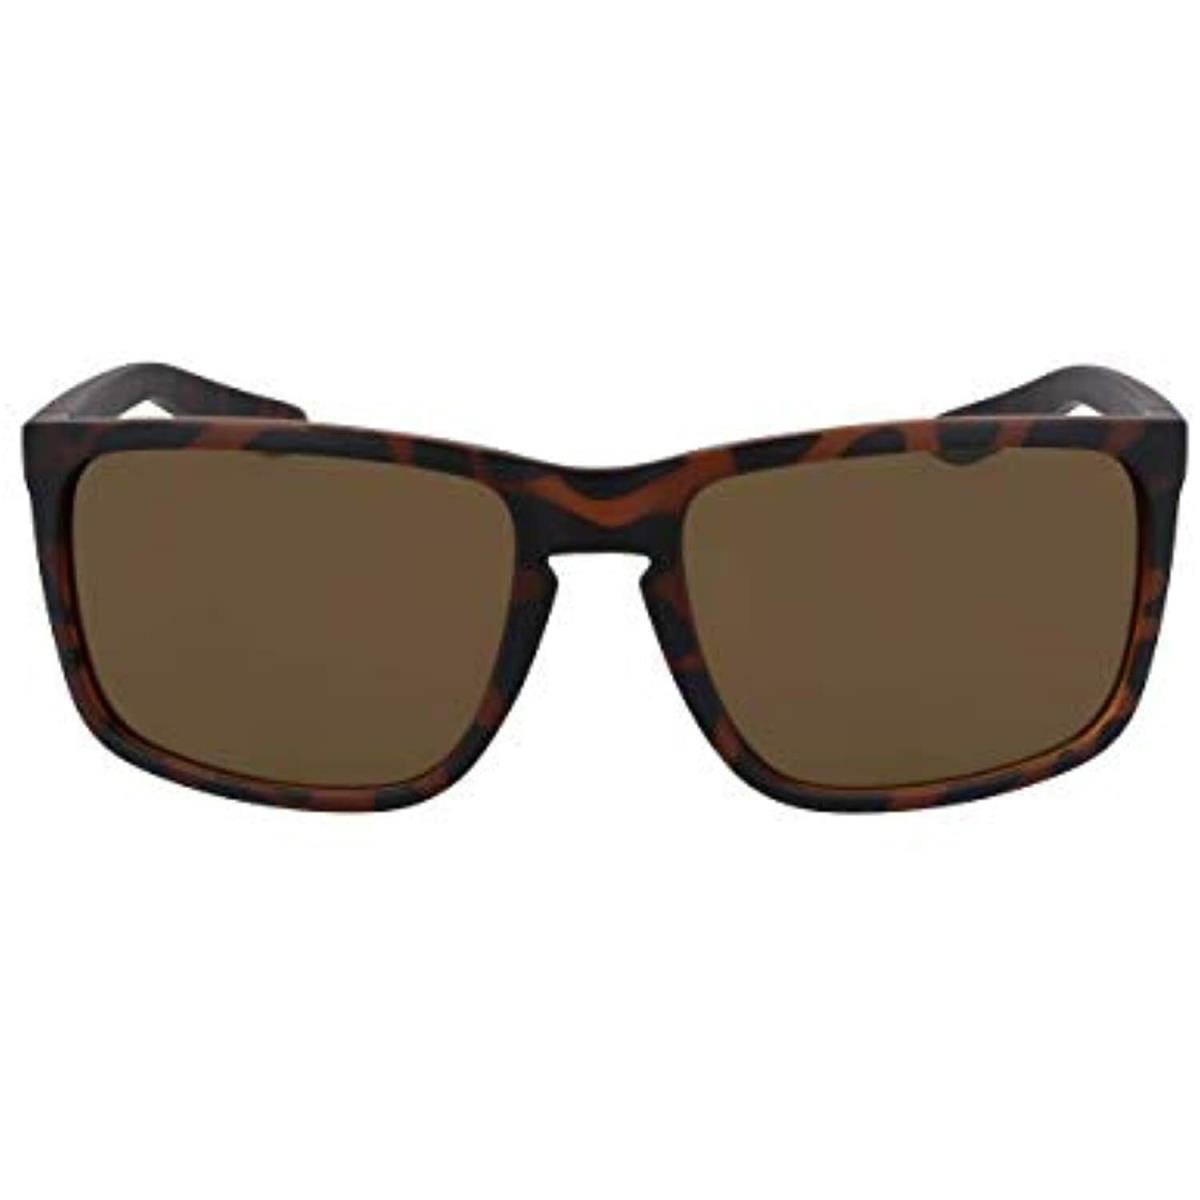 Dragon Melee XL 246 Matte Tortoise Sunglasses with Bronze Lenses 61mm - Matte Tortoise/Bronze, Frame: Matte Tortoise, Lens: Bronze